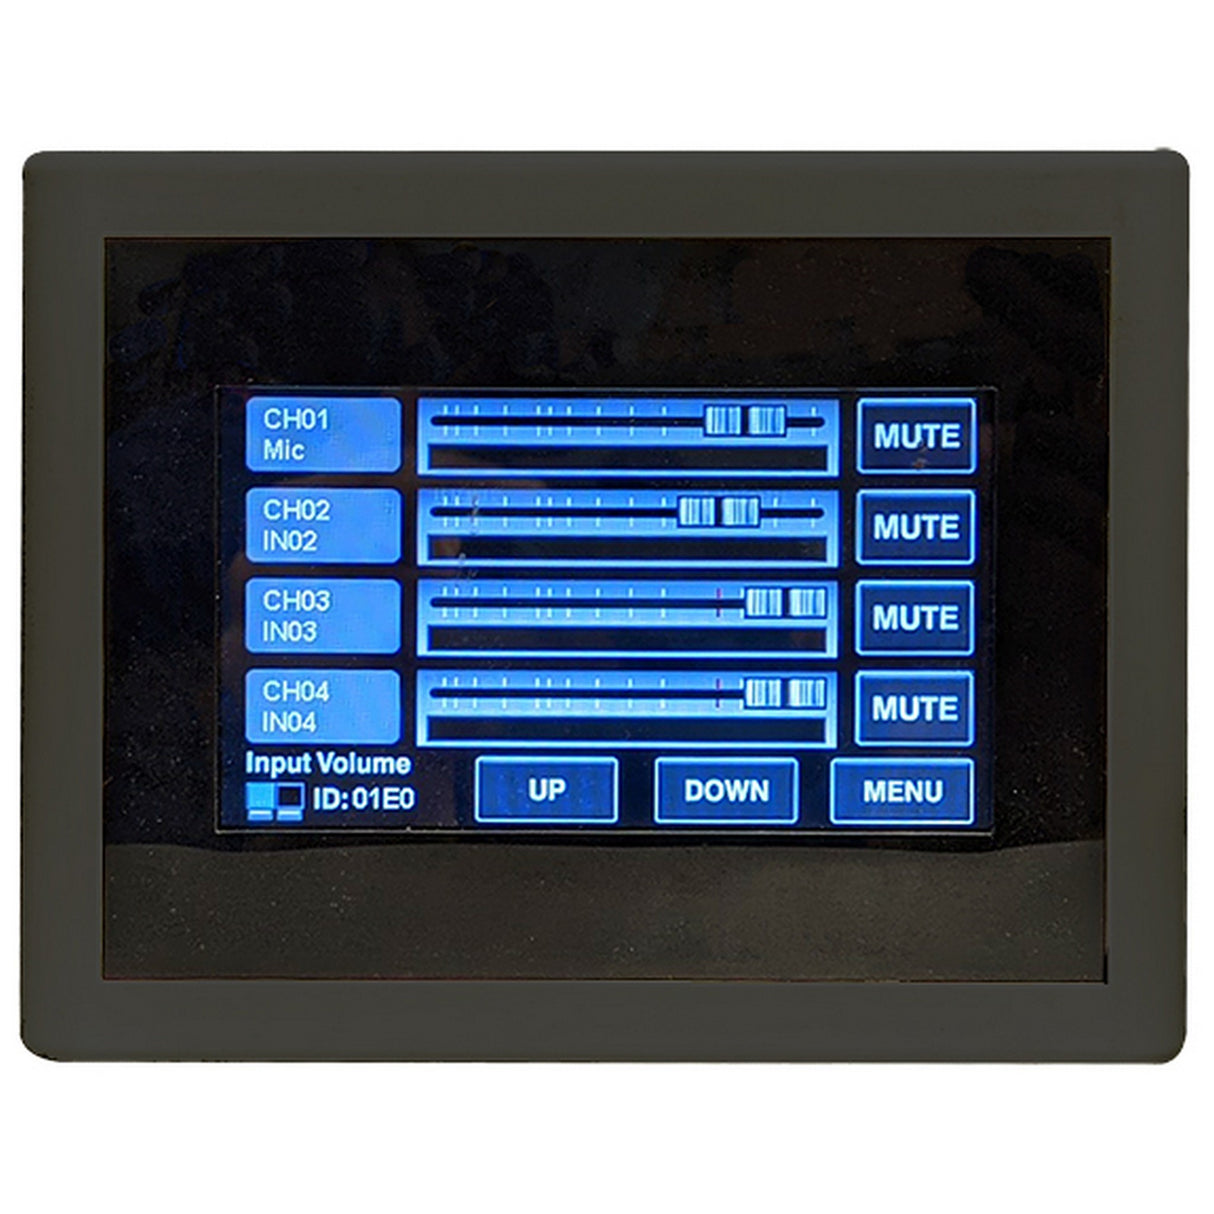 TOA Electronics M-800RCTB-AM Remote Audio Control Panel with Touch Display, White